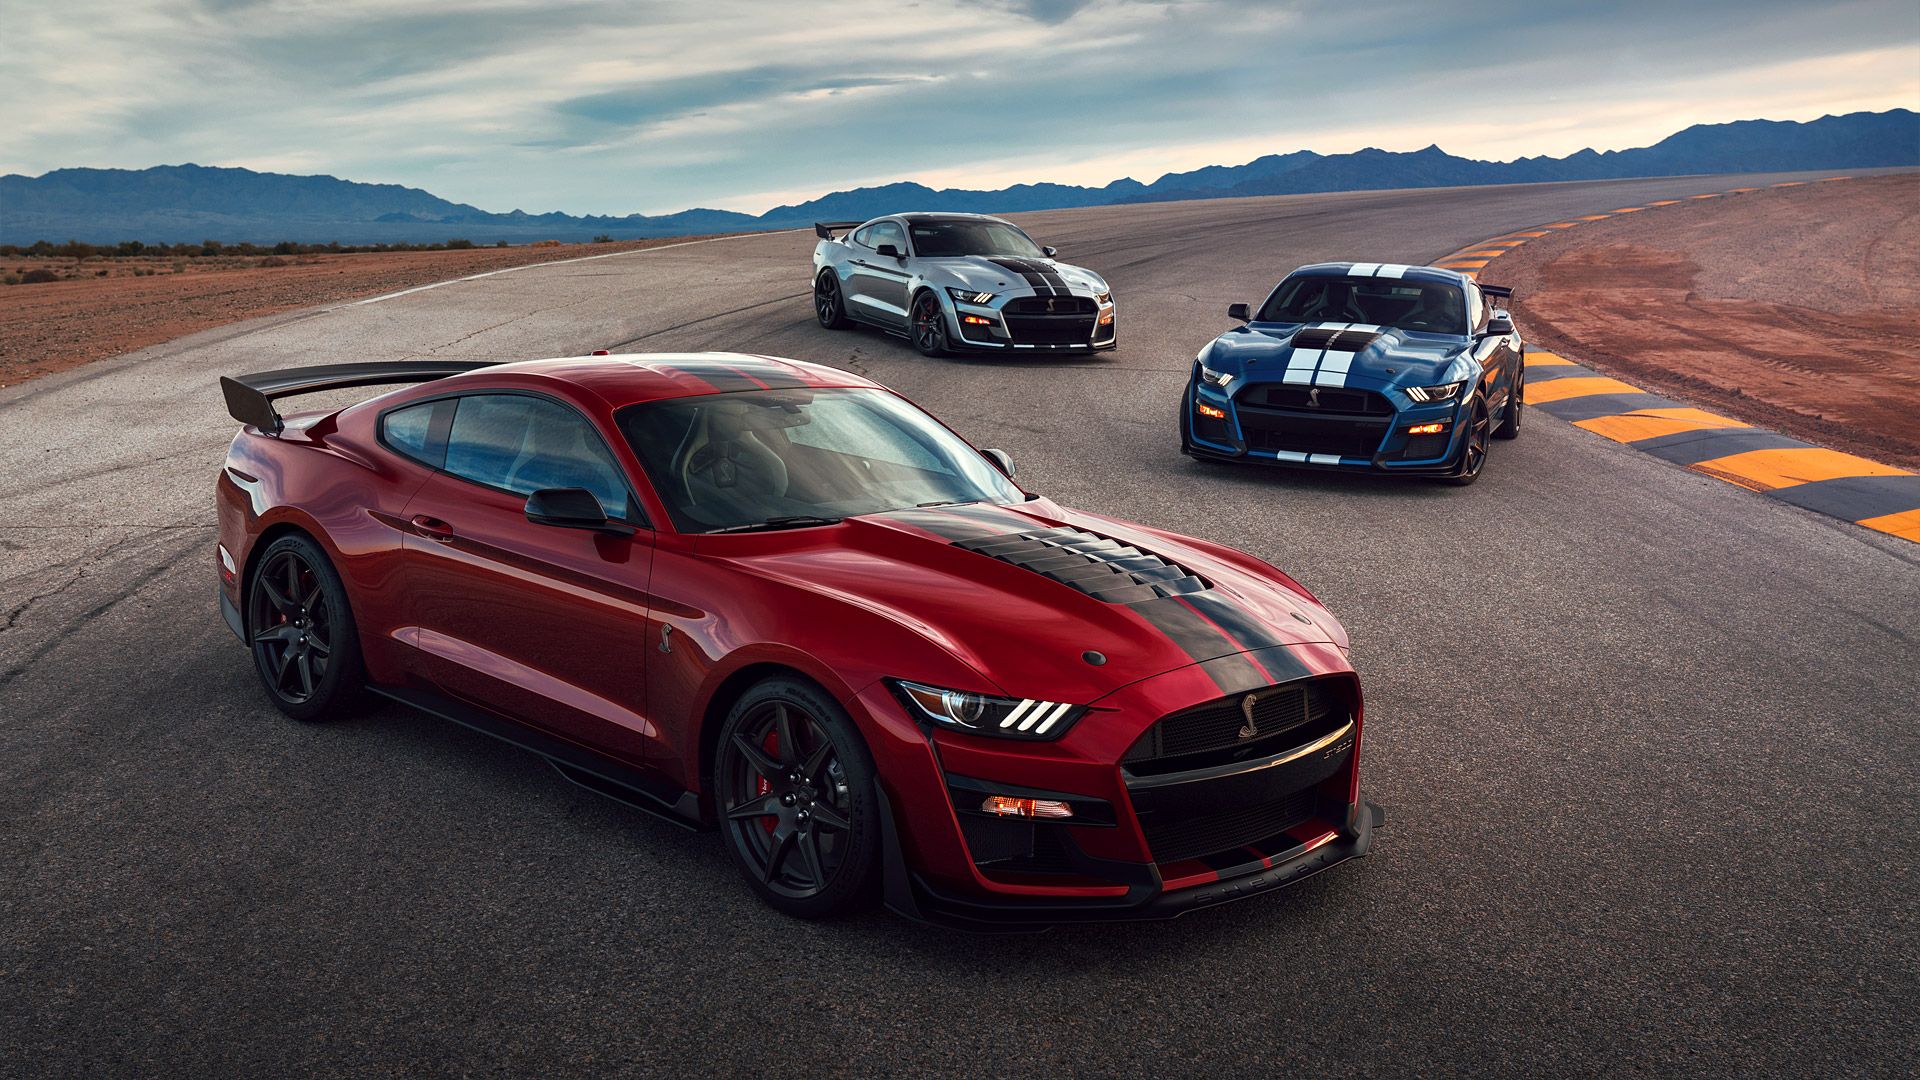 2021 Ford Mustang Gt500 Wallpapers Wallpaper Cave